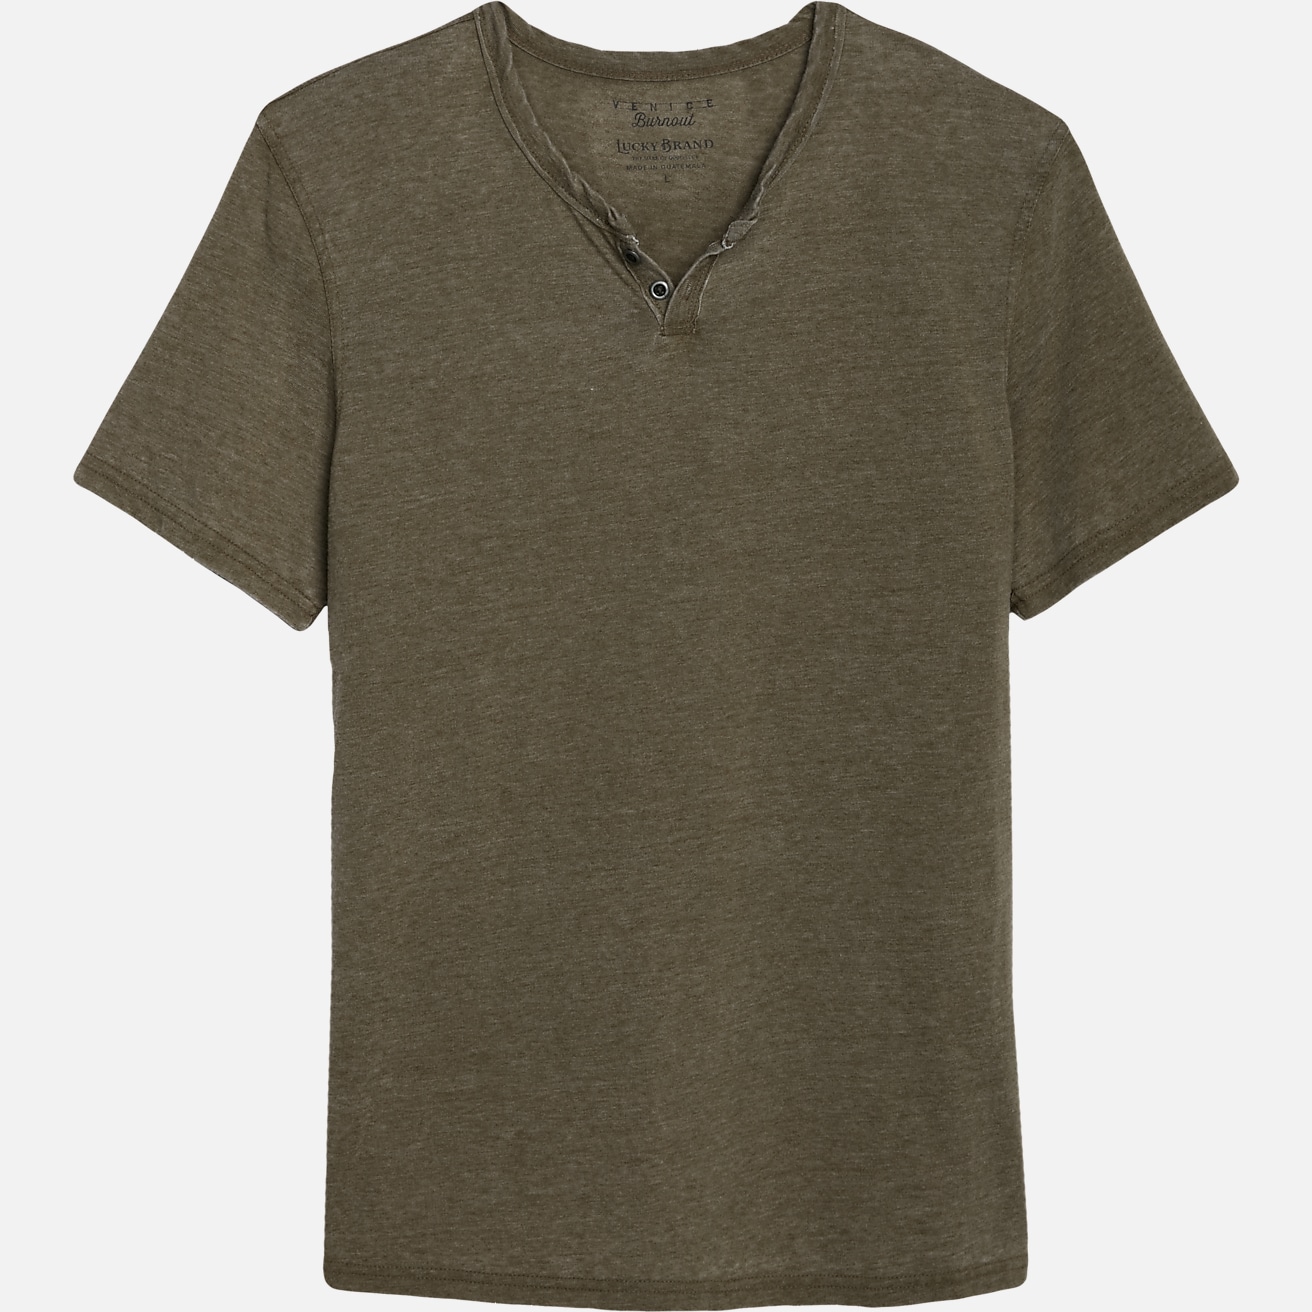 https://image.menswearhouse.com/is/image/TMW/TMW_6KH2_09_LUCKY_BRAND_T_SHIRTS_DARK_OLIVE_MAIN?imPolicy=pdp-mob-2x